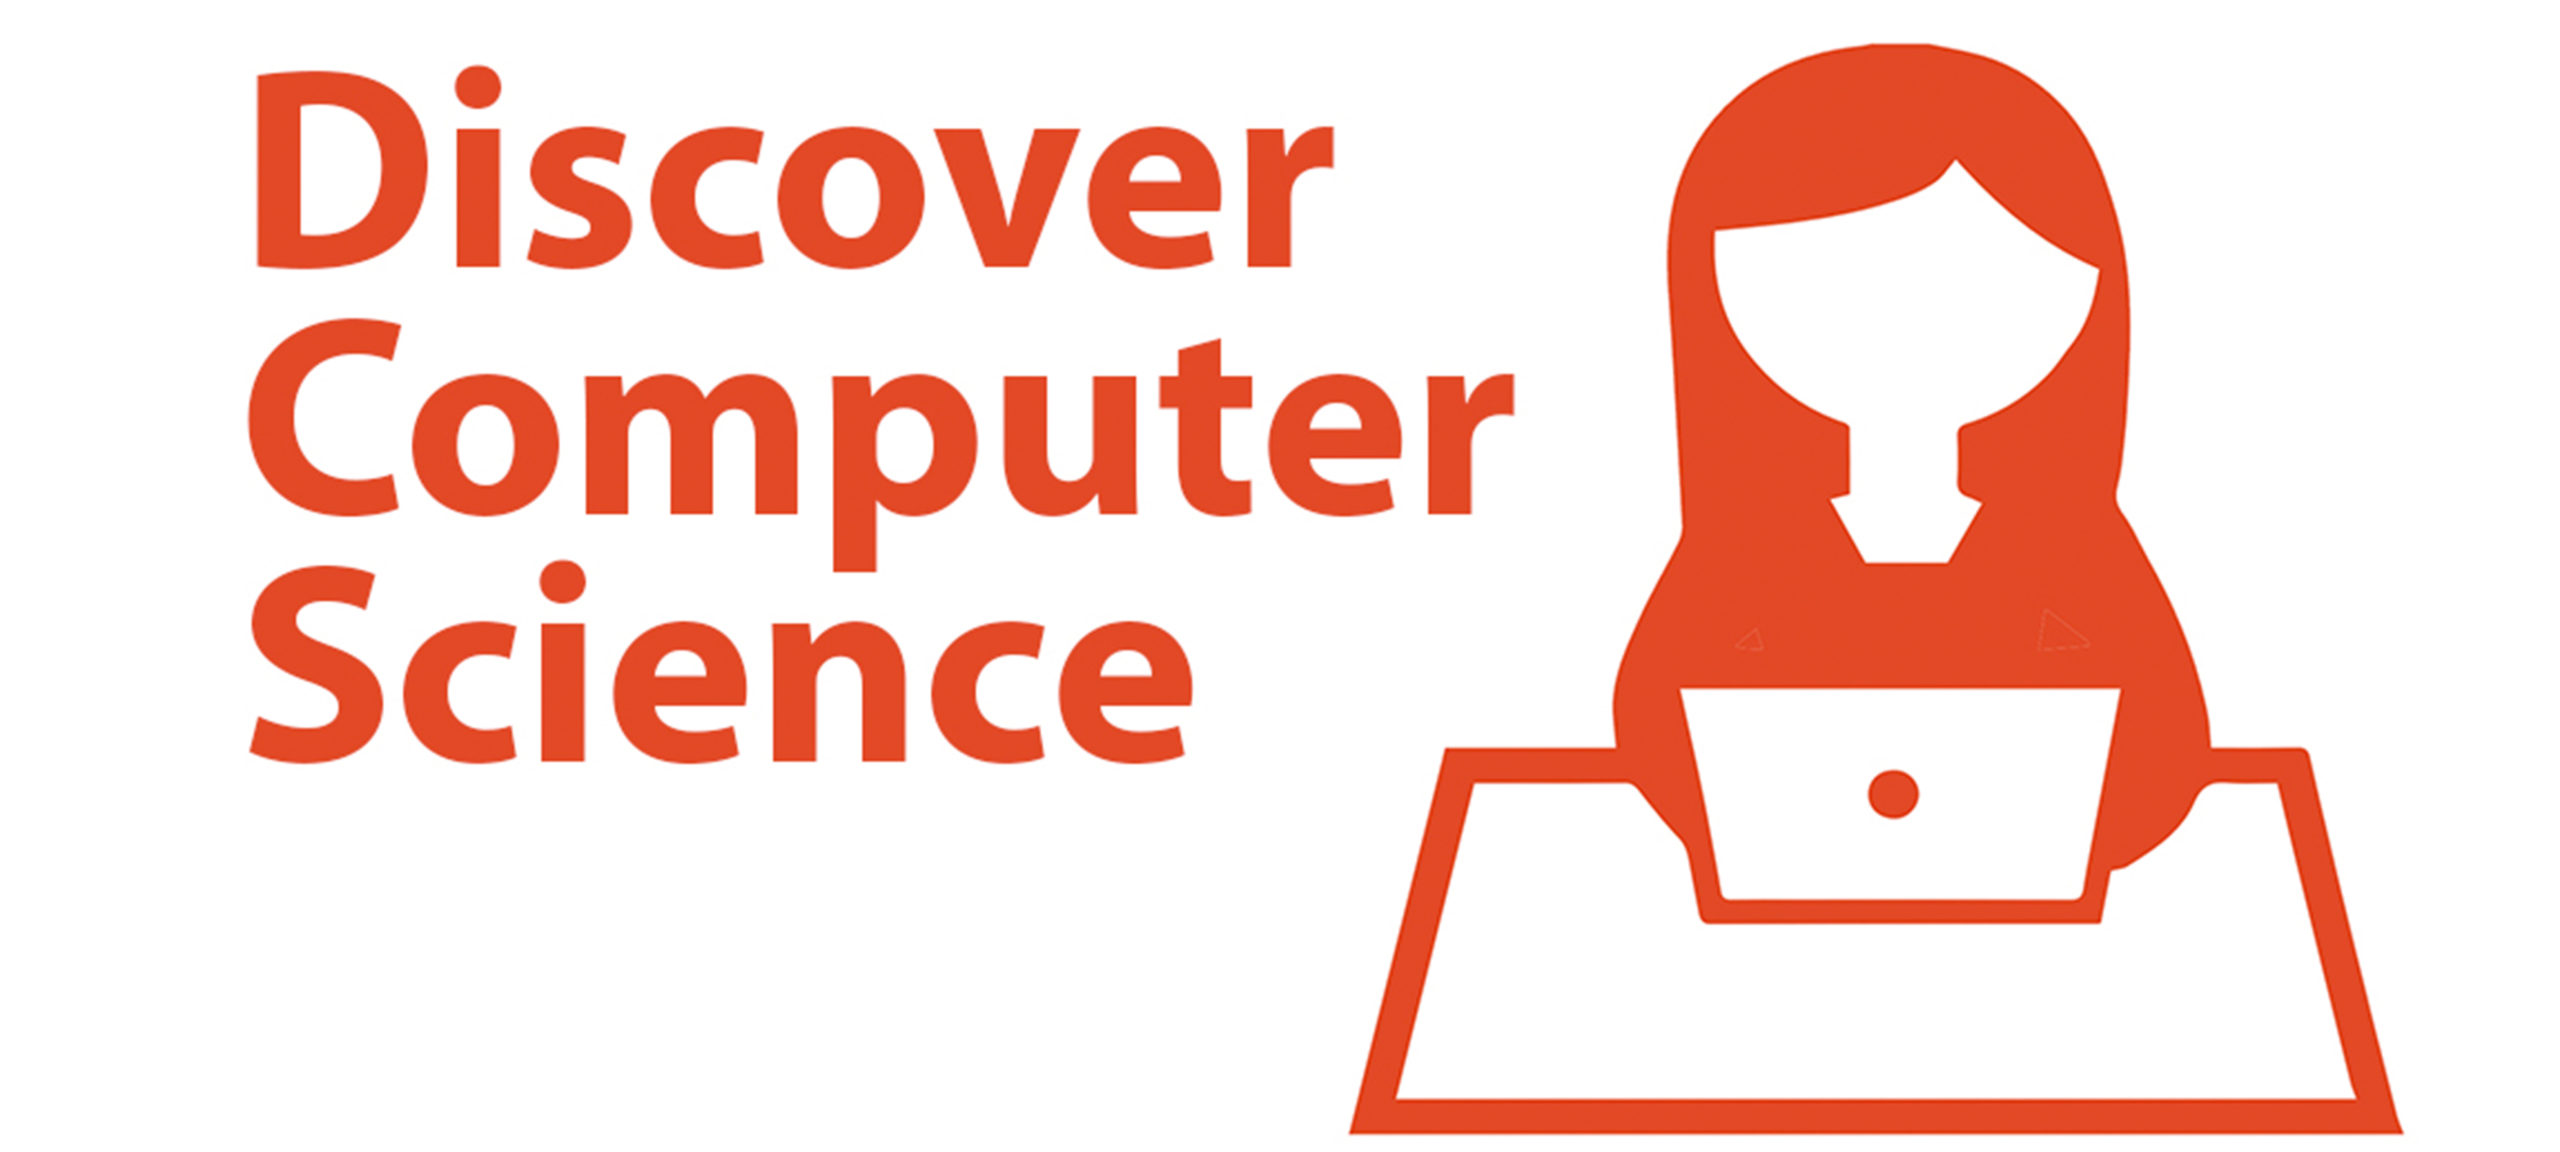 Discover Computer Science graphic